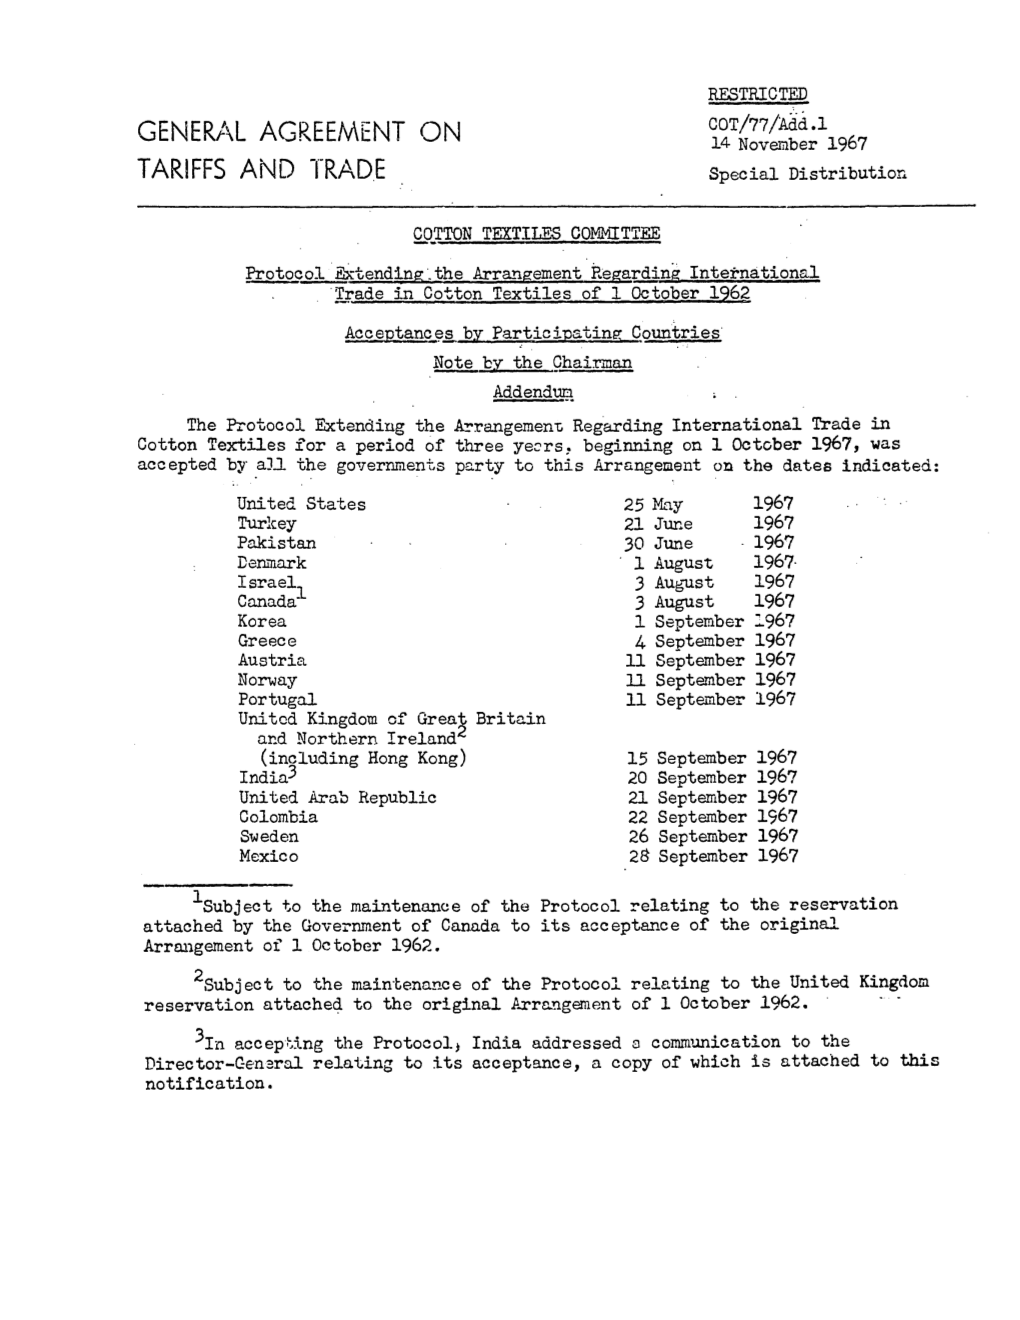 GENERAL AGREEMENT on 14 November 1967 TARIFFS and TRADE Special Distribution